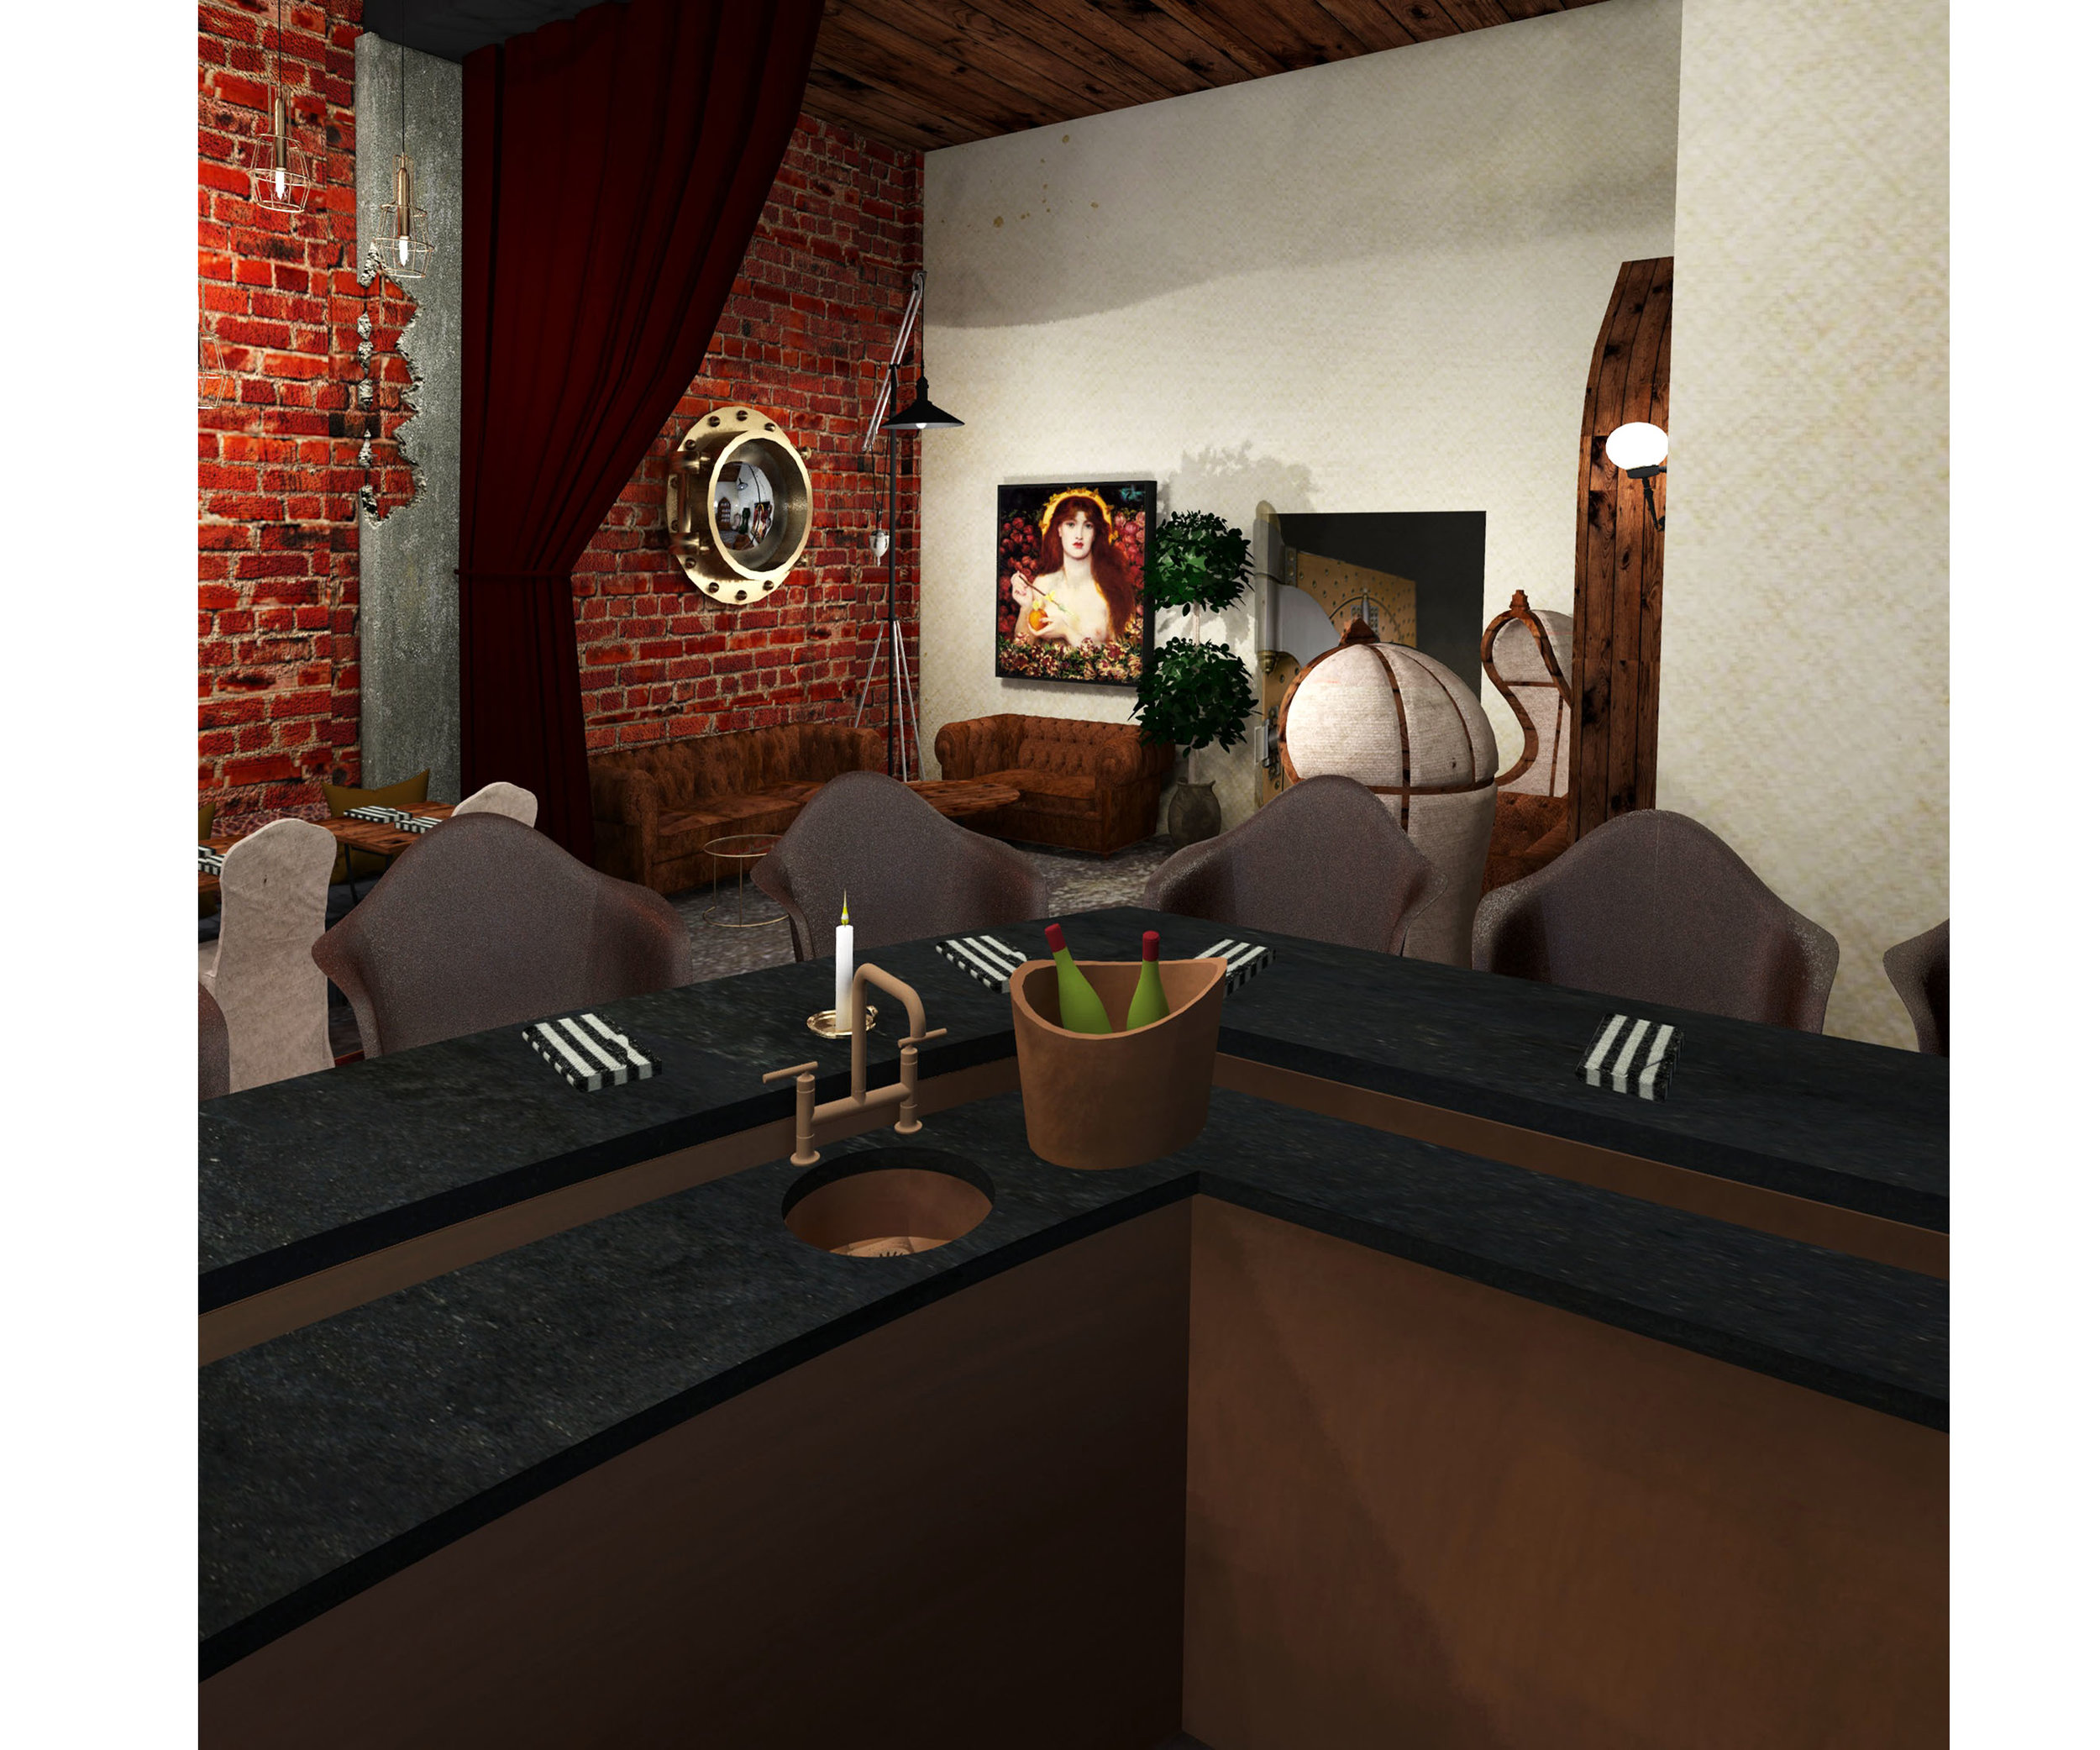 Level 1: Behind the bar, a view to the entryway and of cozy spots to socialize